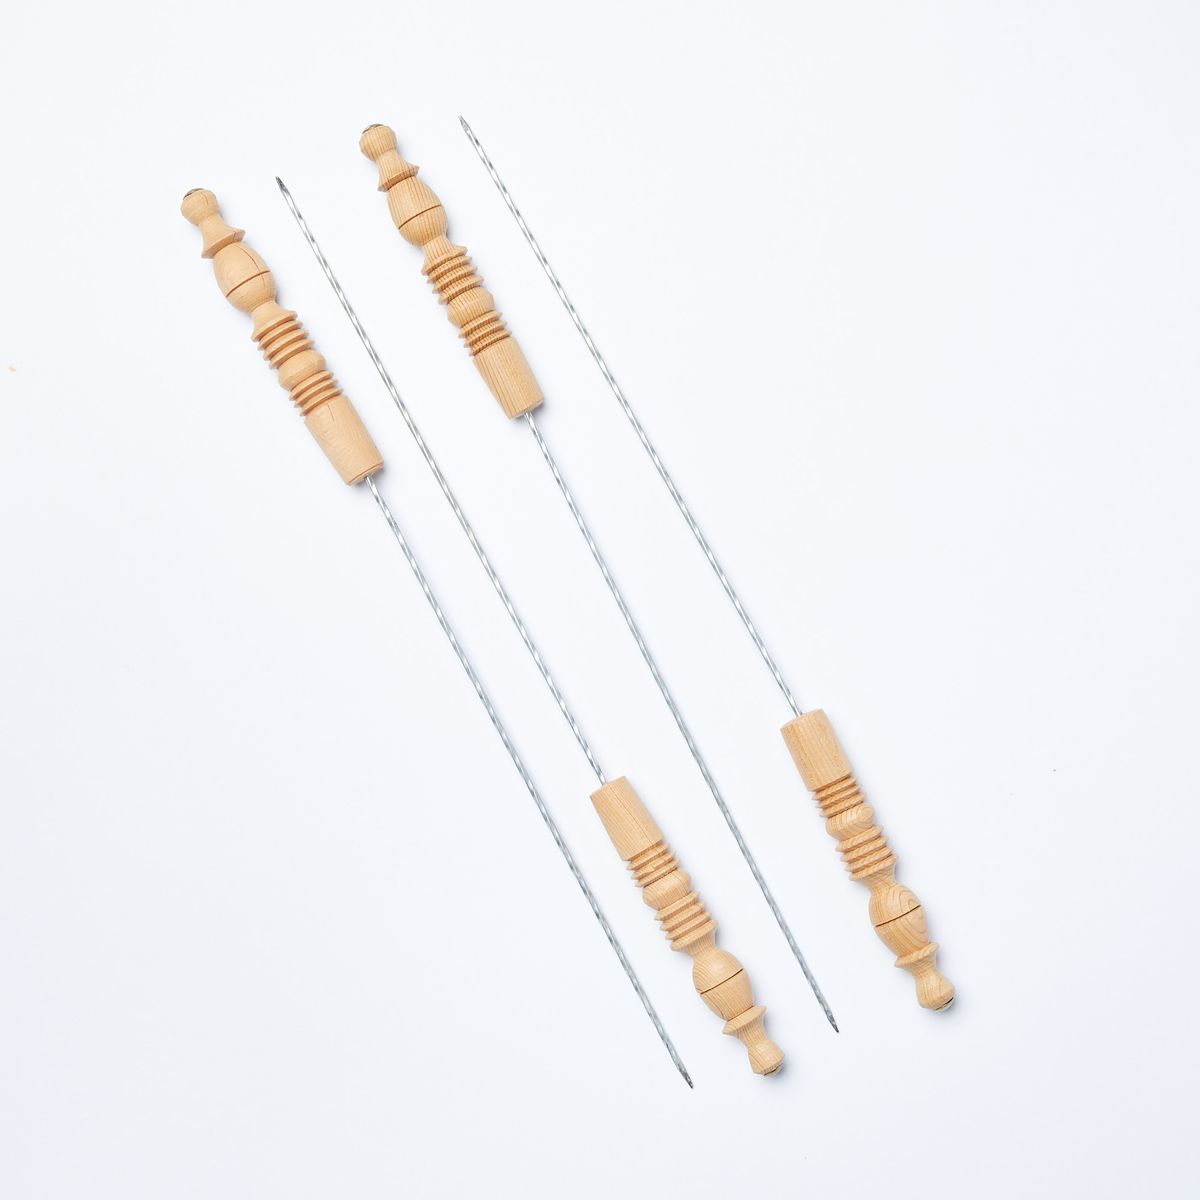 Four metal skewers with wood handles resting on a diagonal